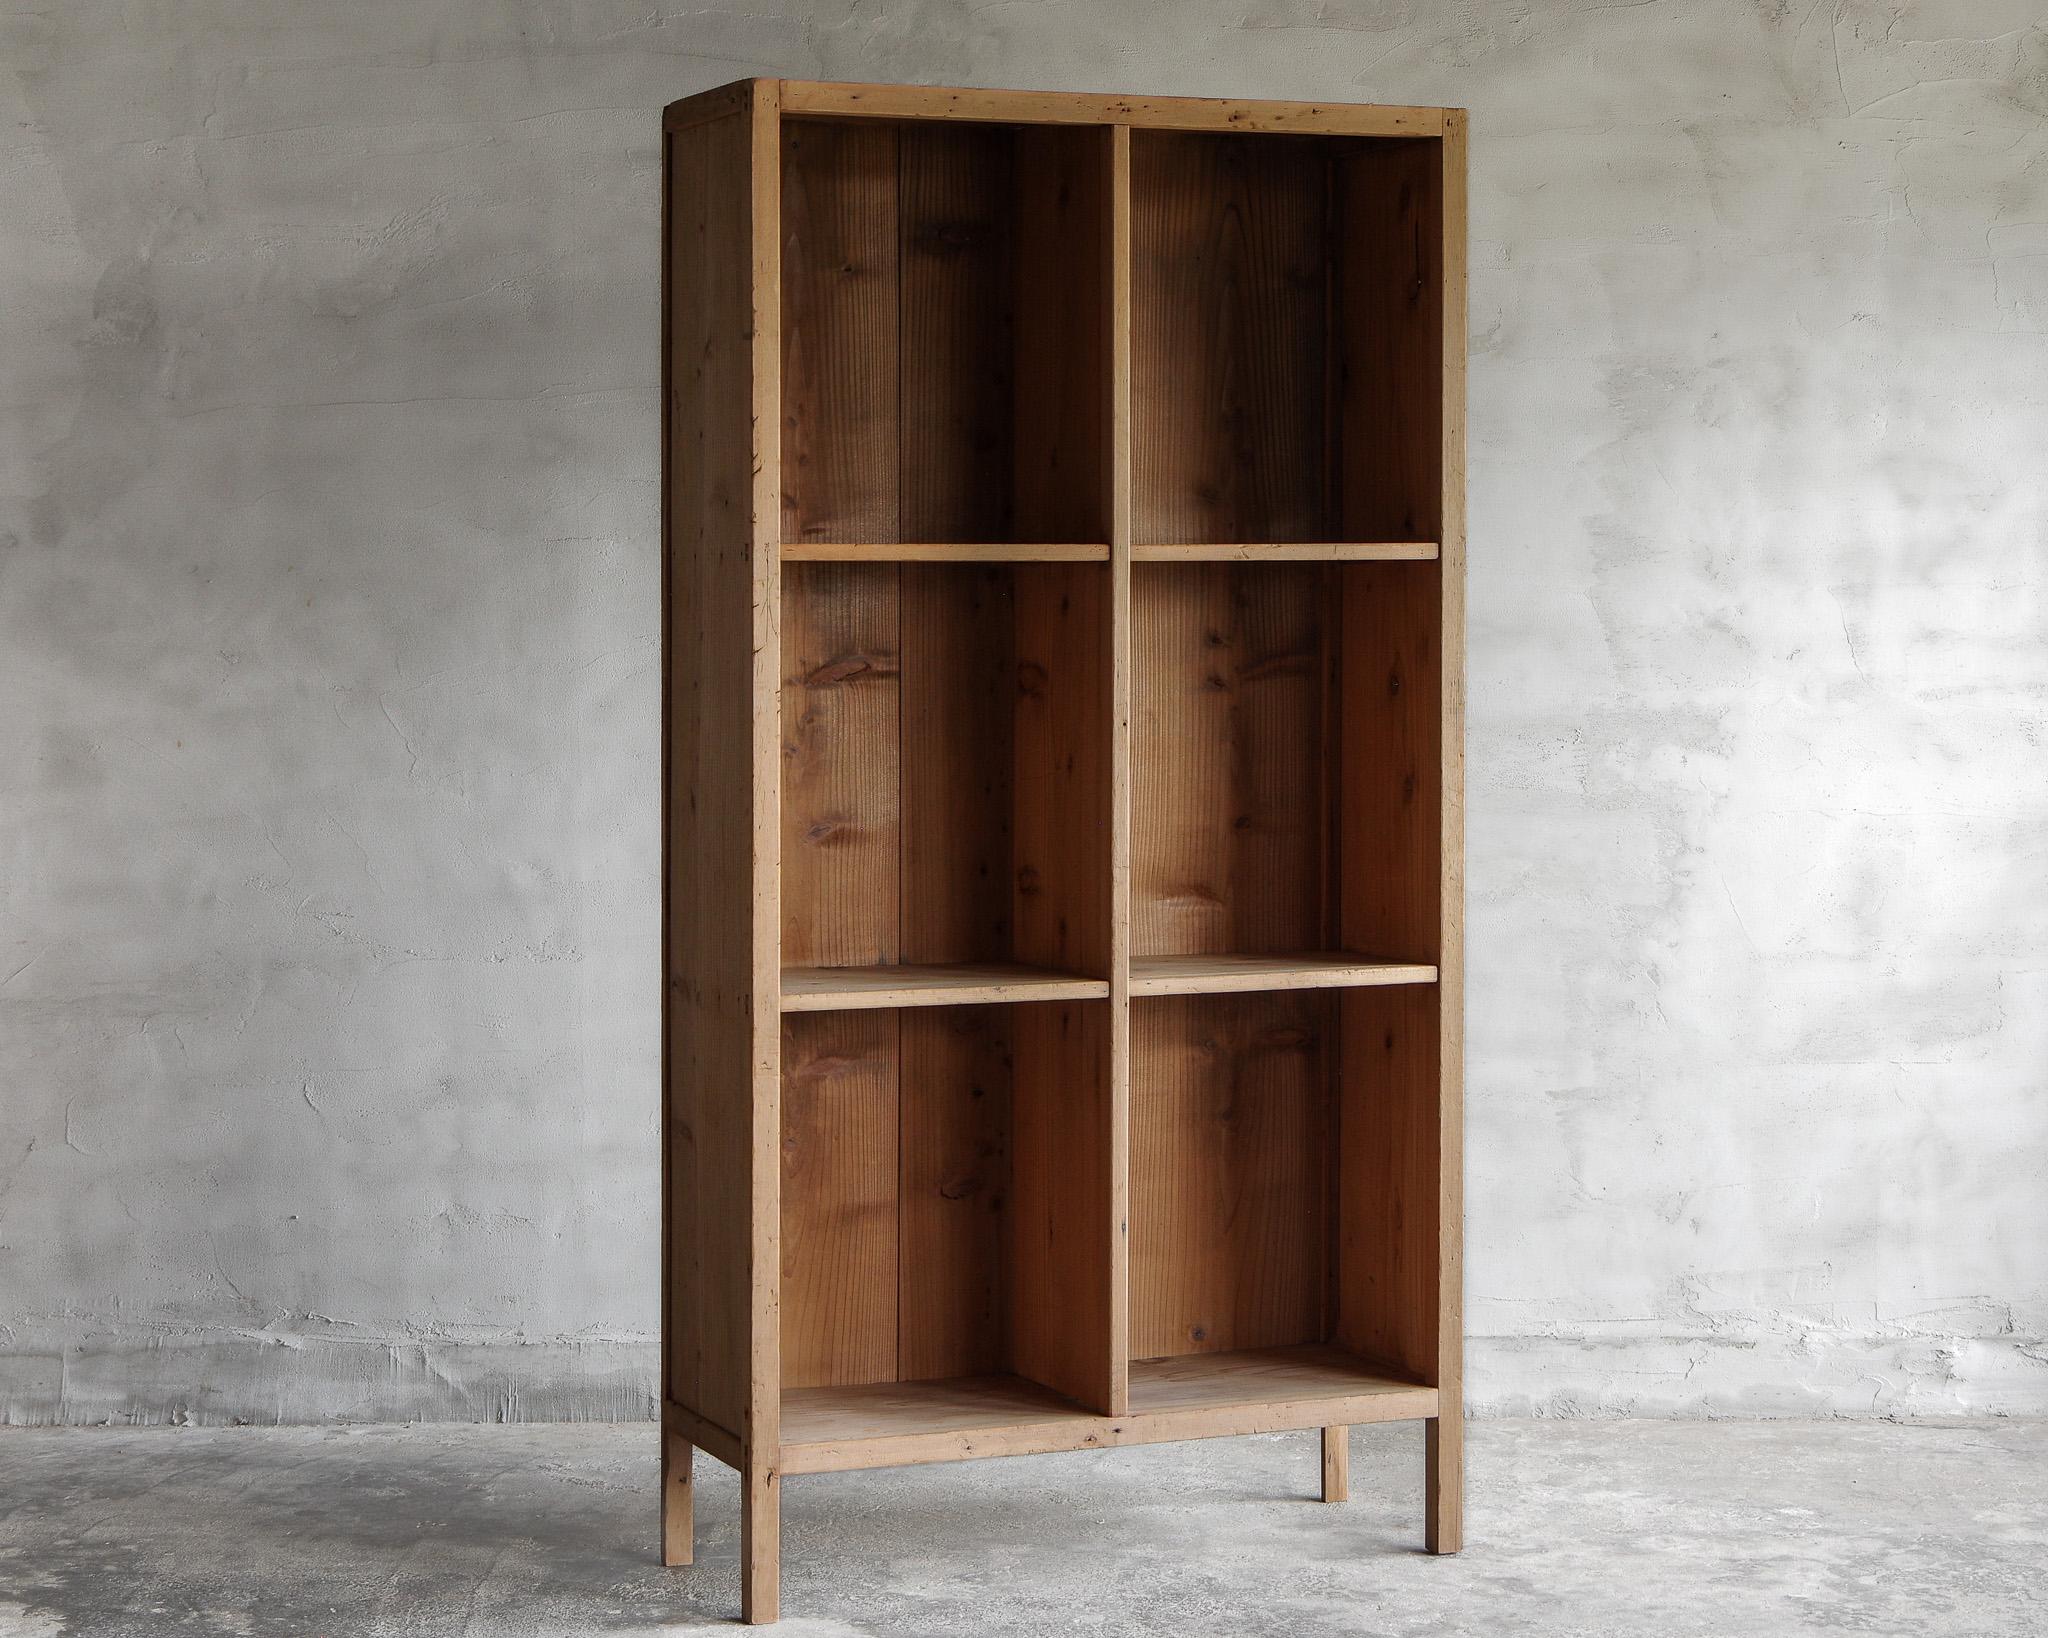 This is a Japanese antique shelf.

This decorative shelf exudes the charm of antiques, with its unique vertical grid design leaving a distinct impression. Its design is simple yet refined, making it an ideal accent for any room.

Its legged design